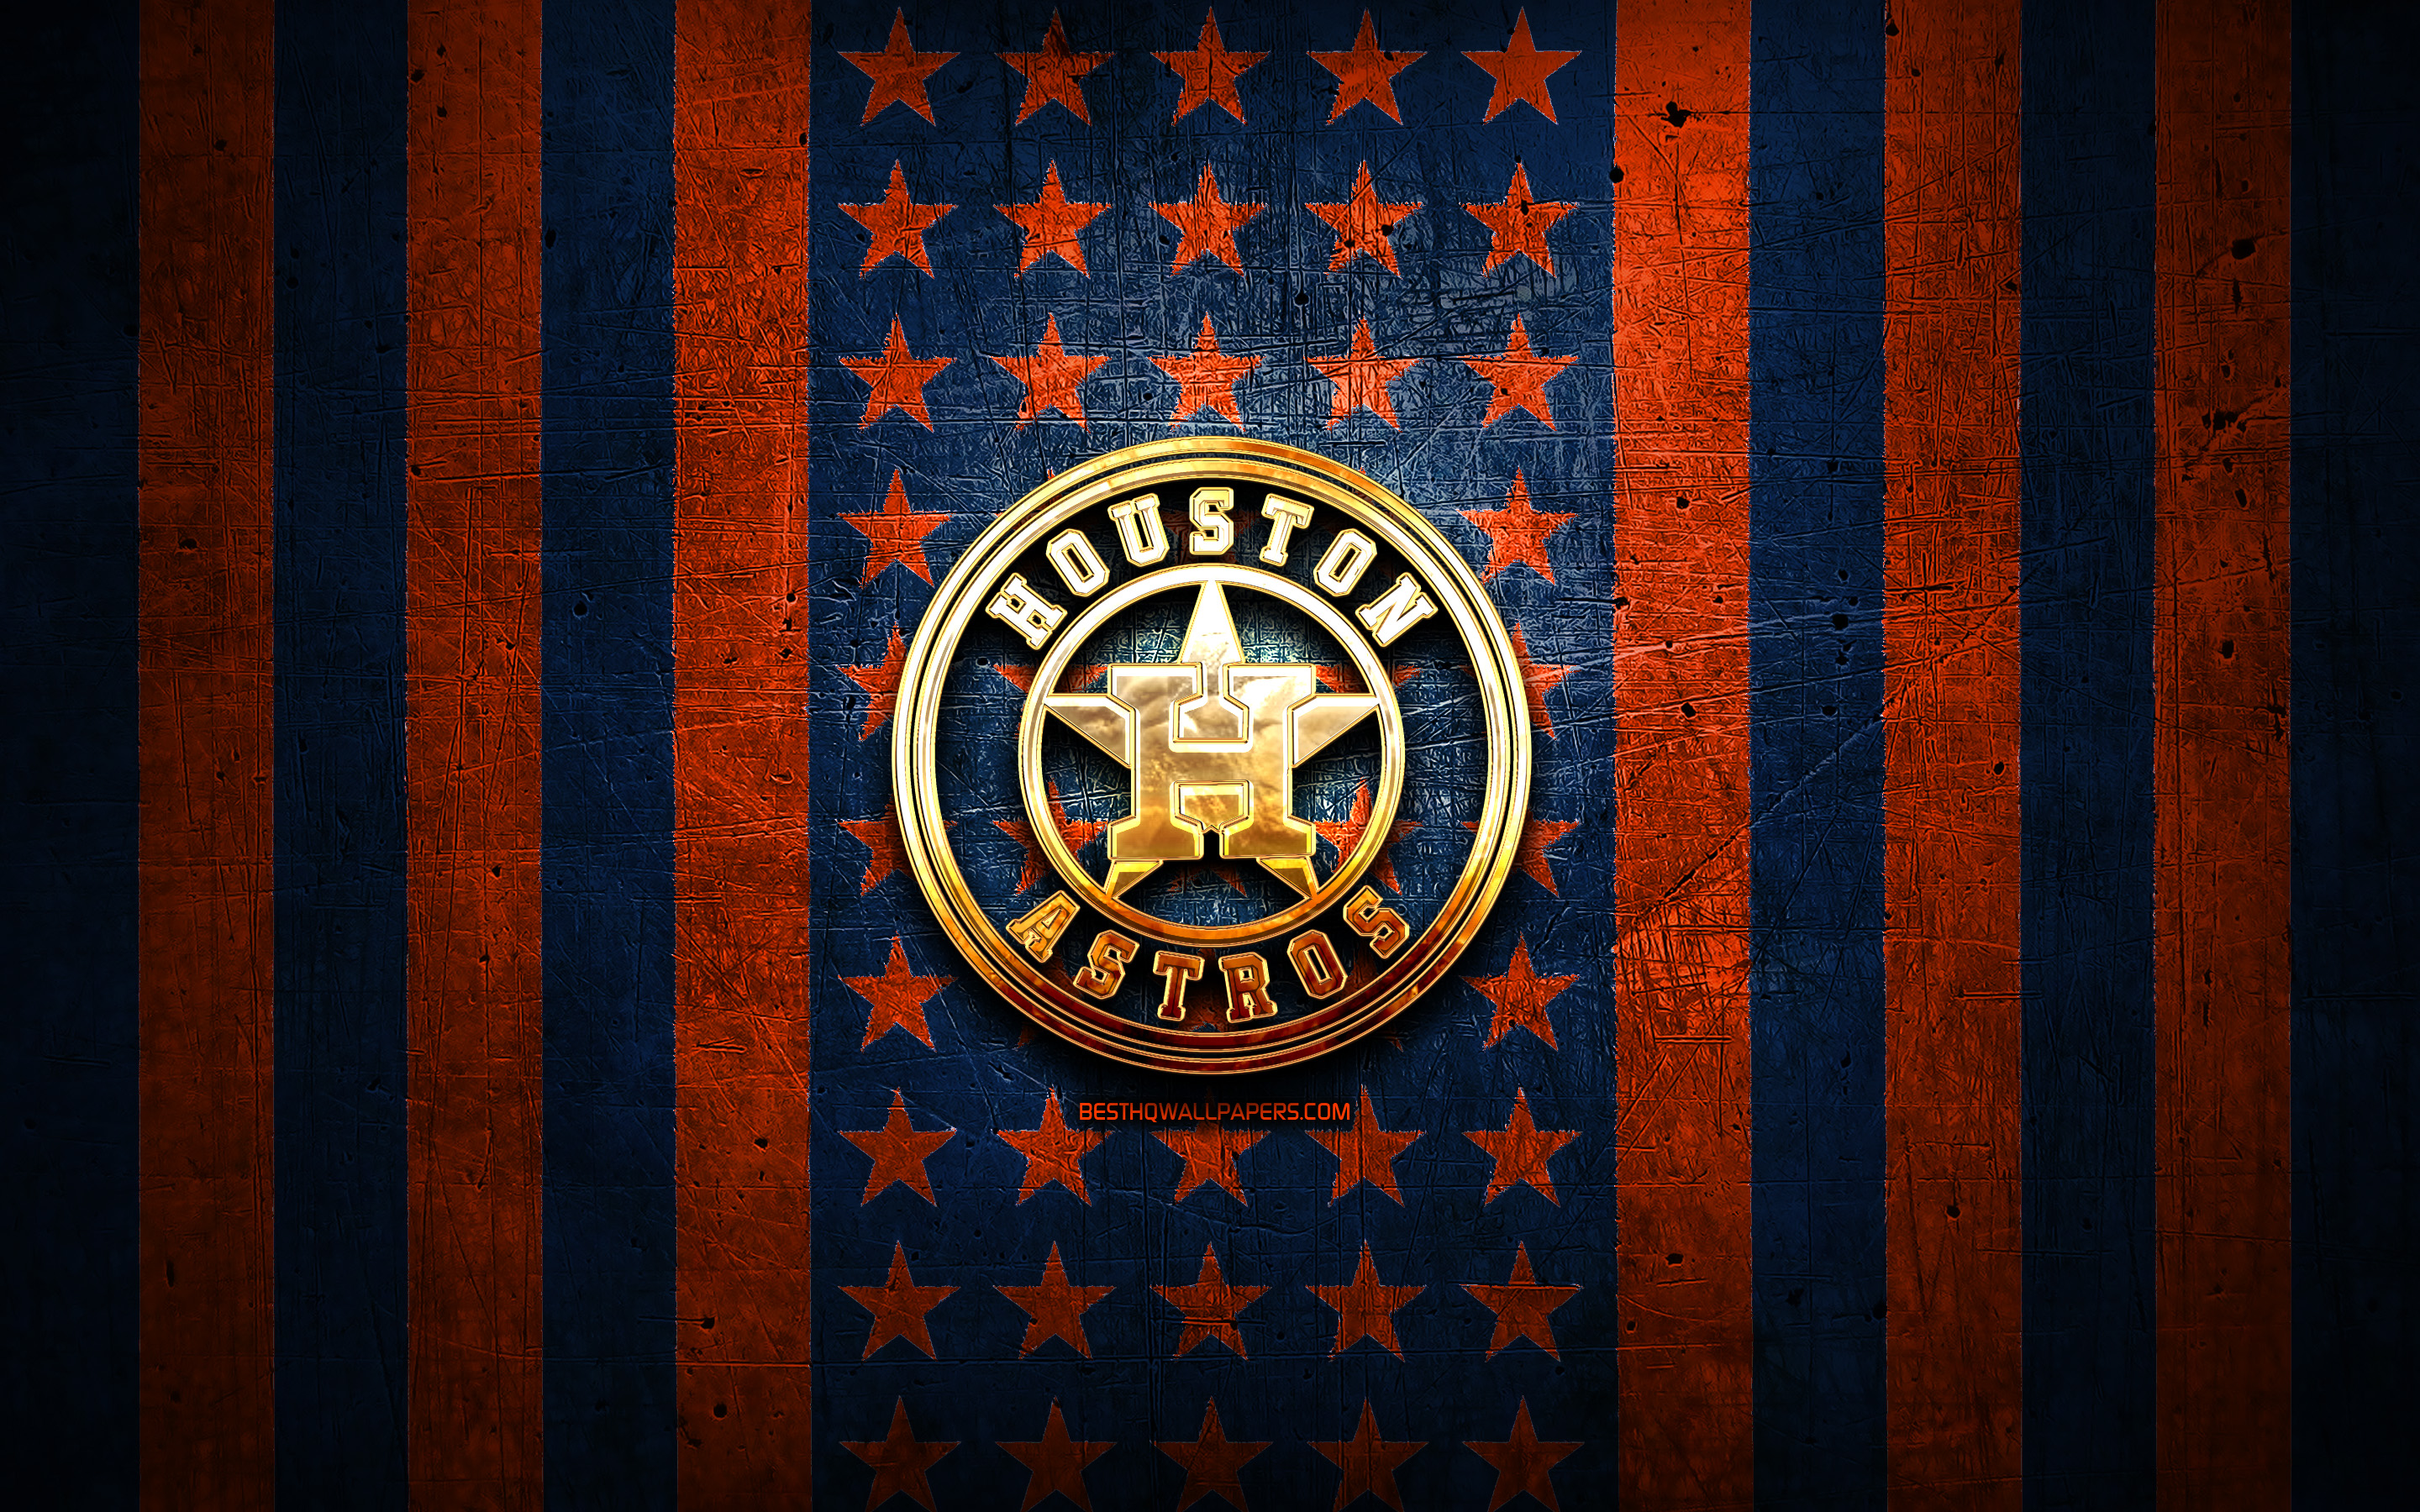 Download wallpaper Houston Astros flag, MLB, orange blue metal background, american baseball team, Houston Astros logo, USA, baseball, Houston Astros, golden logo for desktop with resolution 2880x1800. High Quality HD picture wallpaper